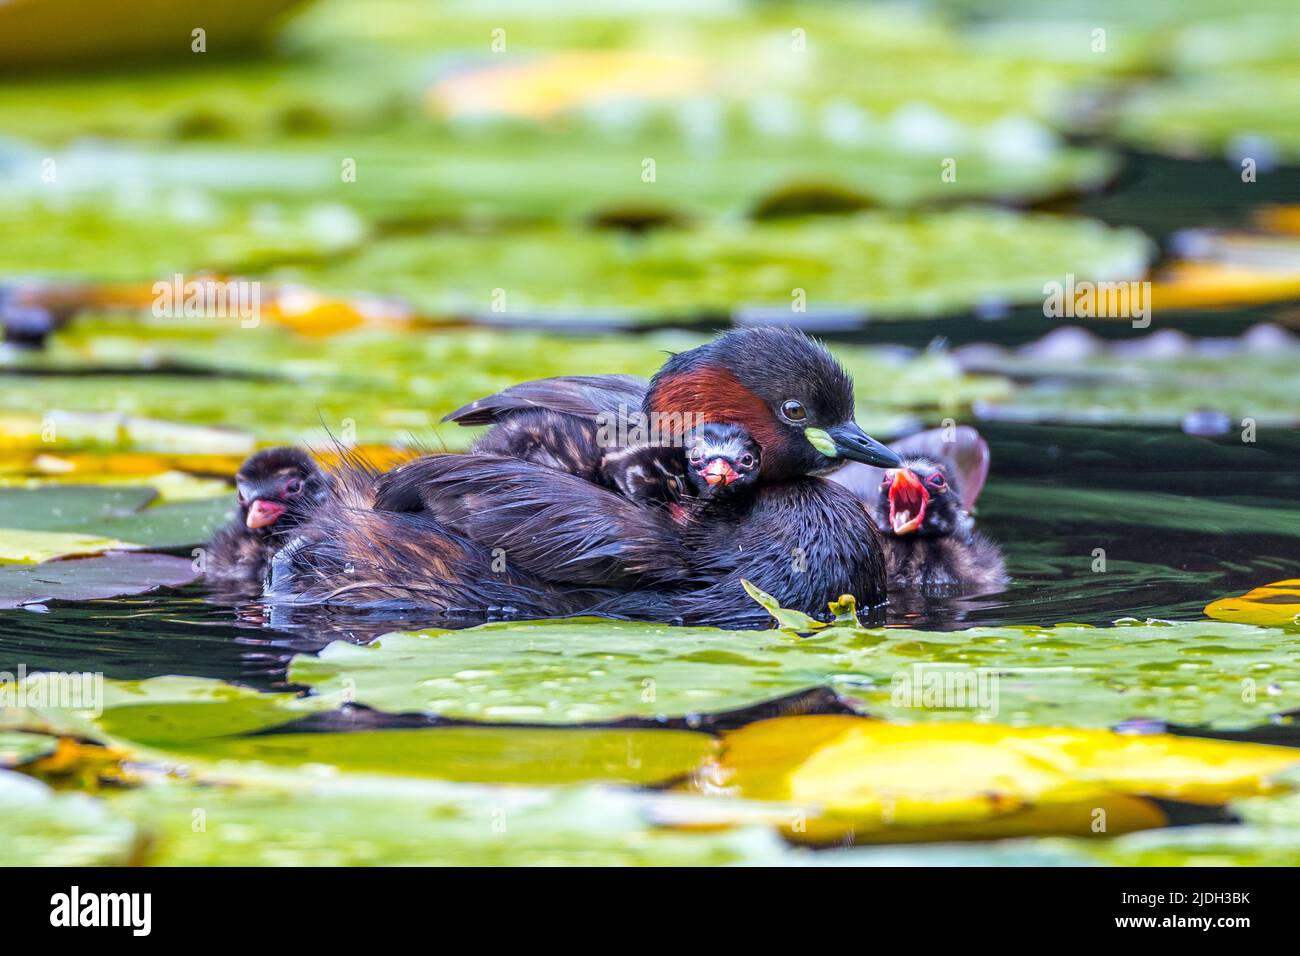 little grebe (Podiceps ruficollis, Tachybaptus ruficollis), swimming with young birds in a water lily pond, Germany, Baden-Wuerttemberg Stock Photo